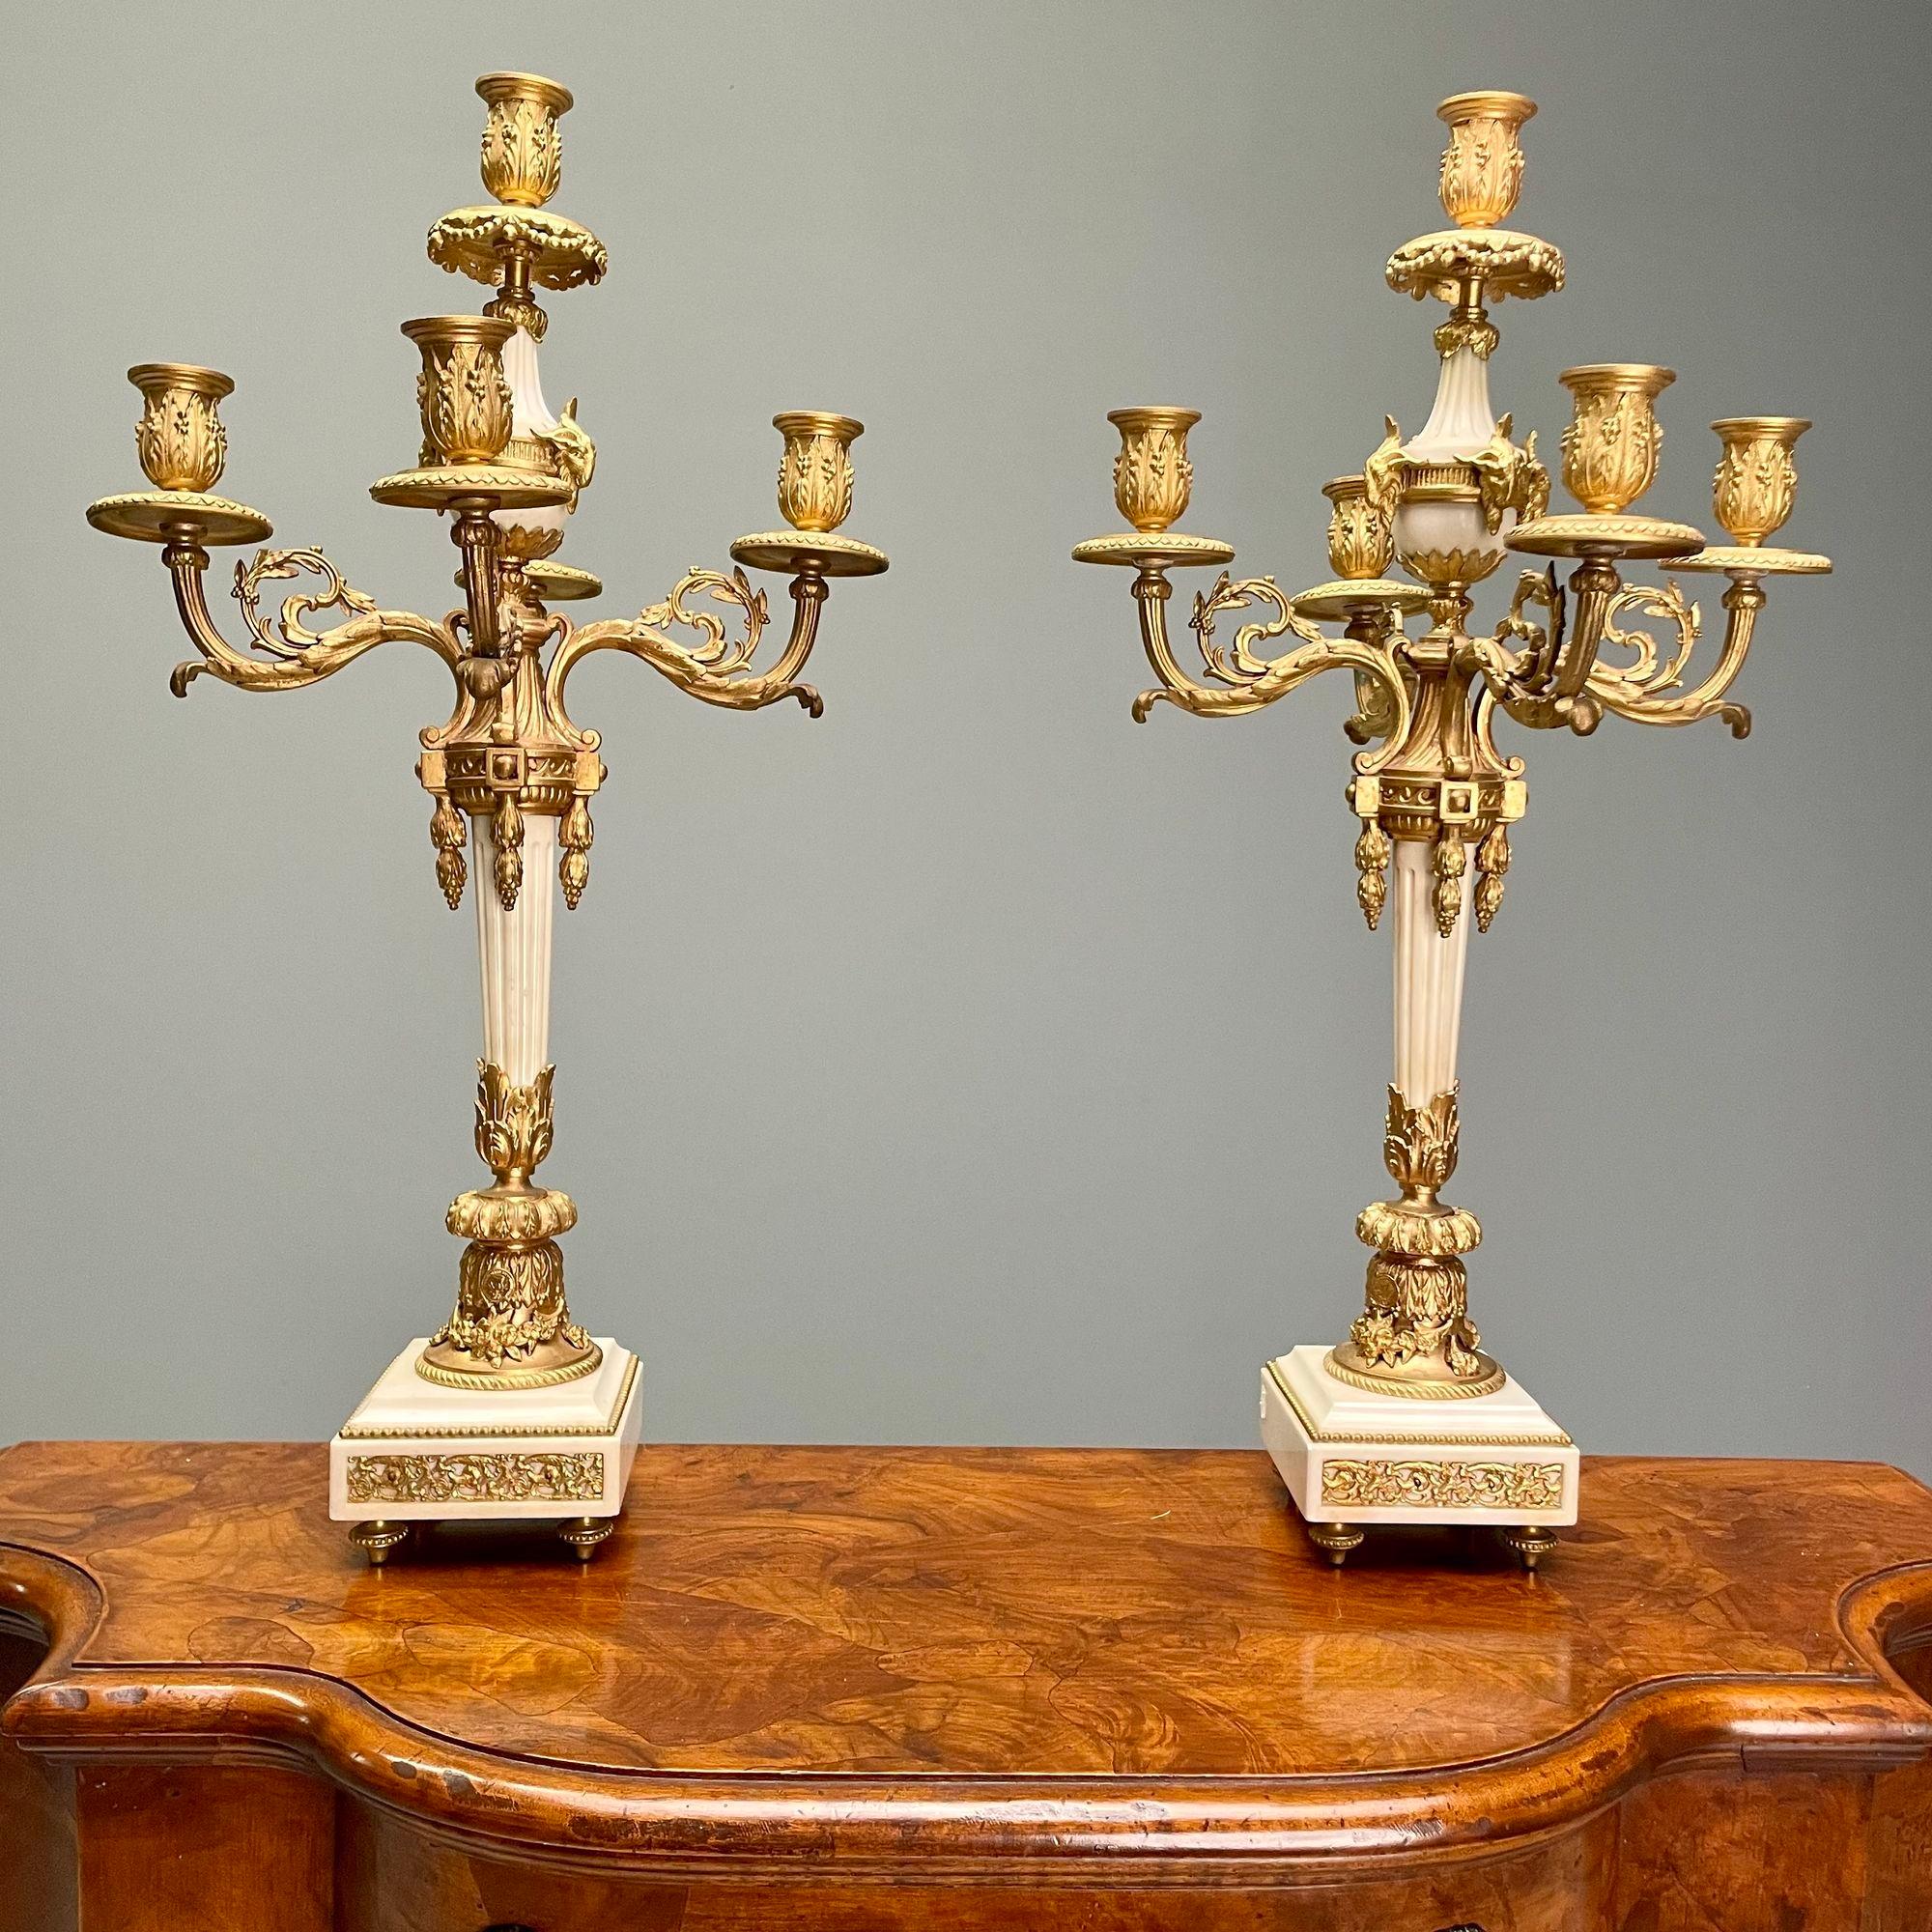 Louis XVI Style, Pair of Candelabras, Gilt Bronze, Marble, France, 1920s

Pair of candelabras having rams heads with five arms are large and impressive flanking a mantle clock displaying the lovely Leto playing in the garden with between two marble